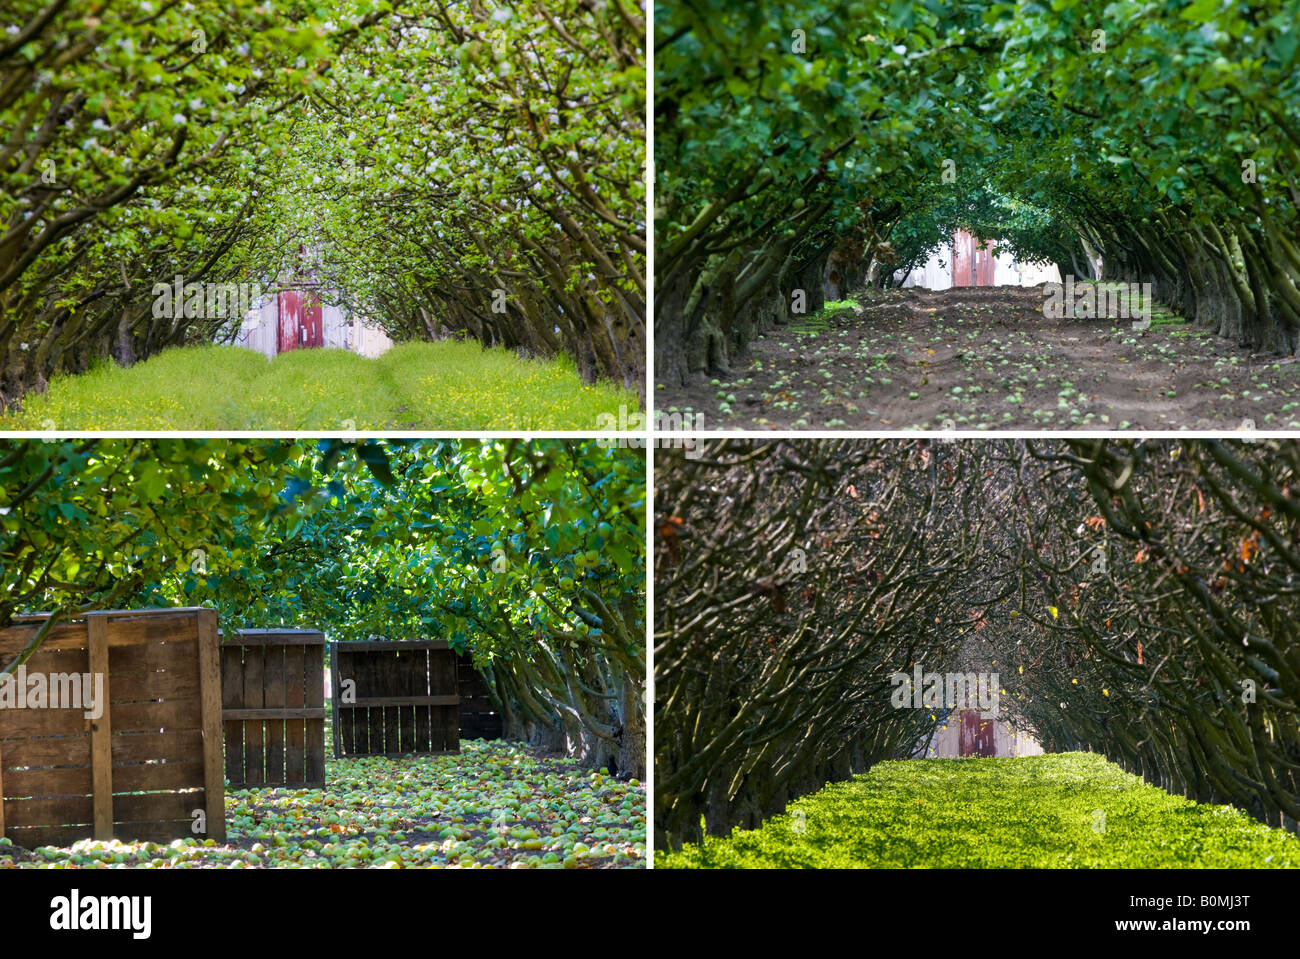 The same row of trees in an apple orchard leading to a barn door shown in four seasons, spring, summer, autumn, and winter. Stock Photo